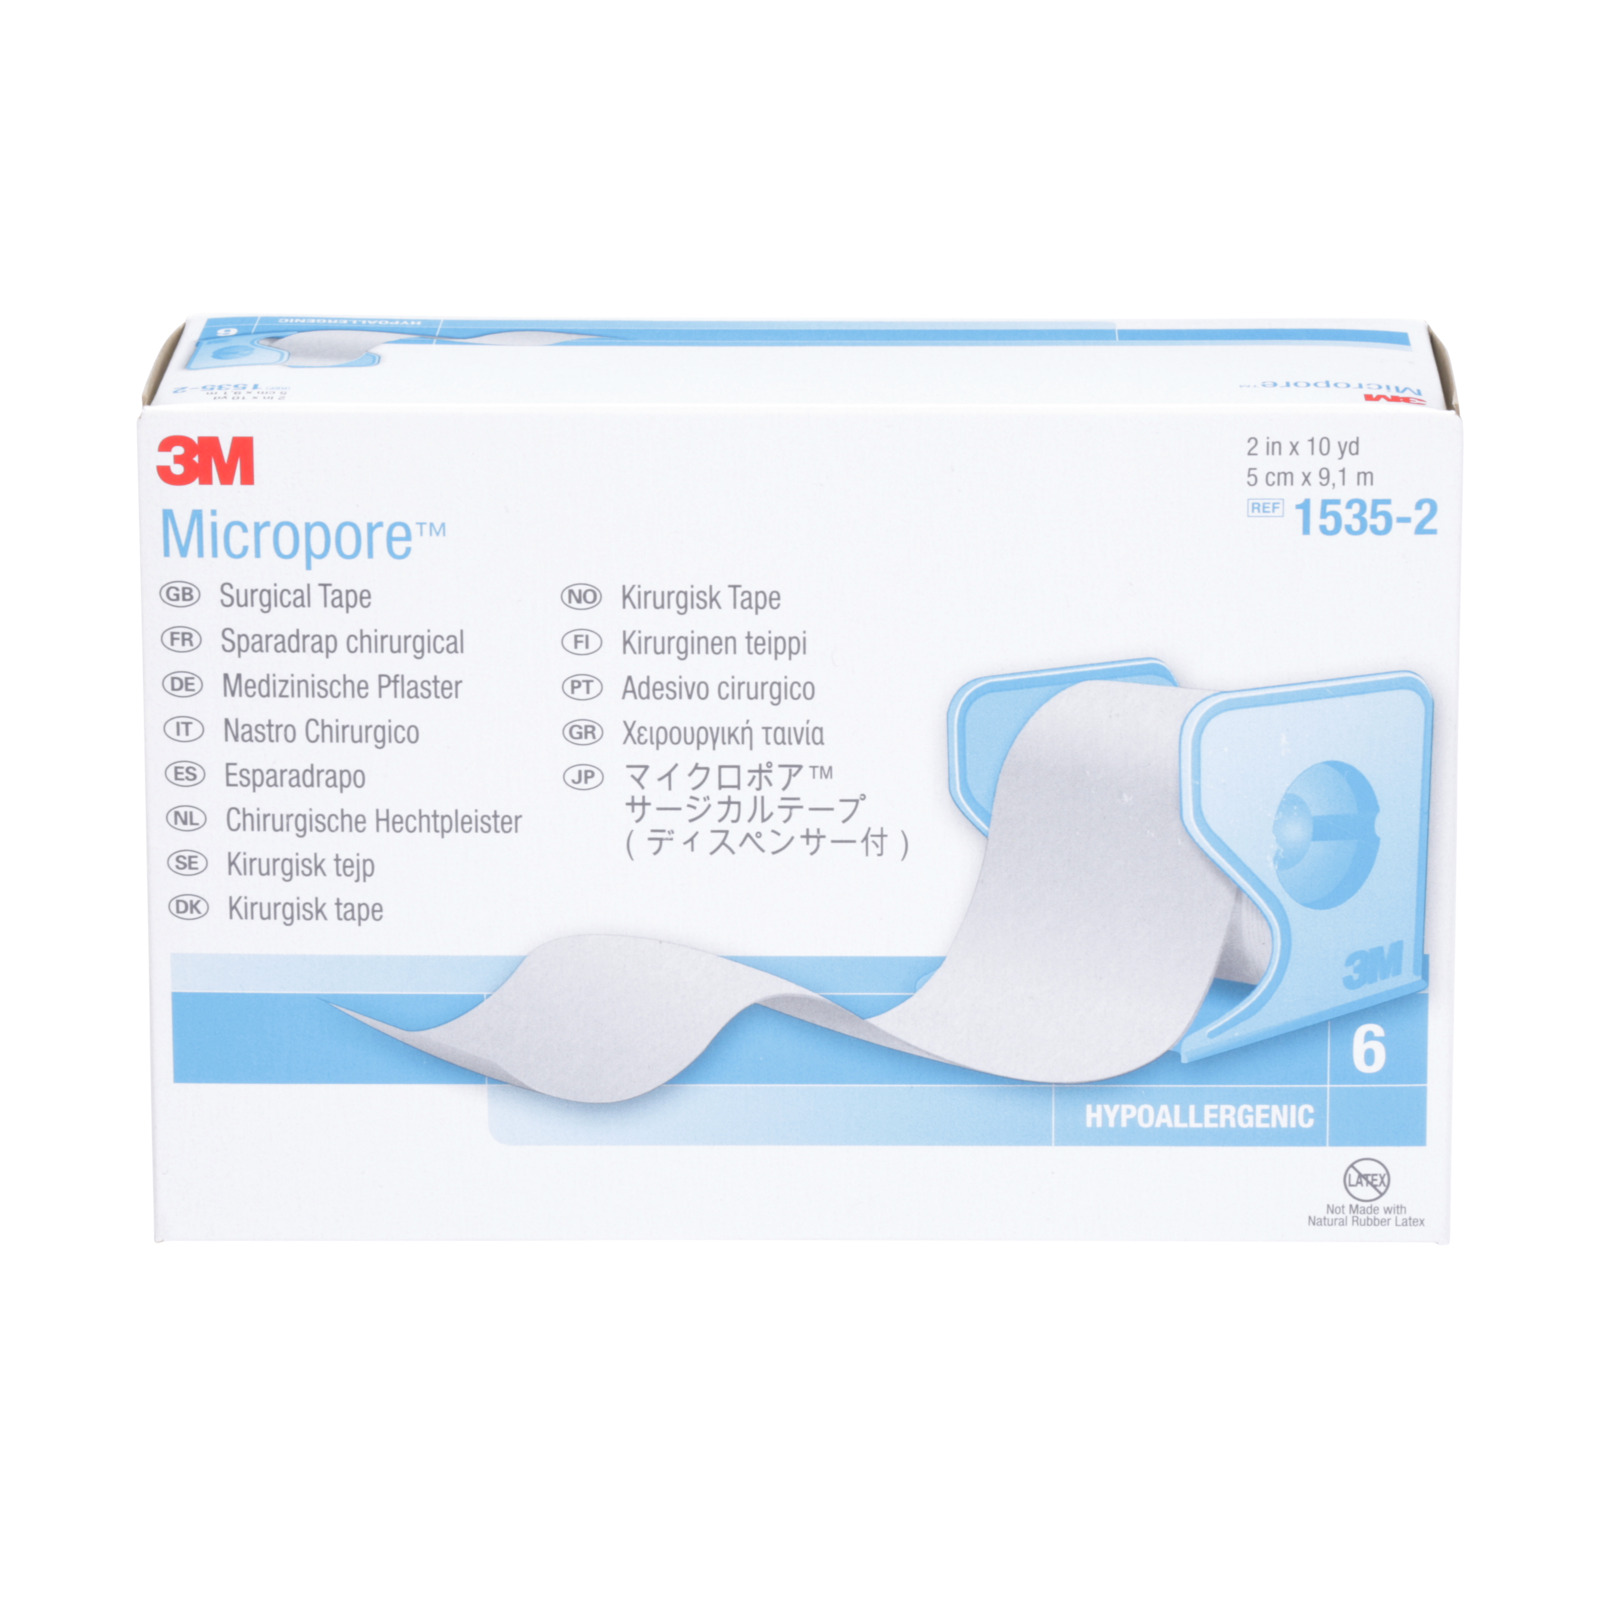 3M™ Micropore™ Wundpflaster – 1535-2, 6 Stück/Packung